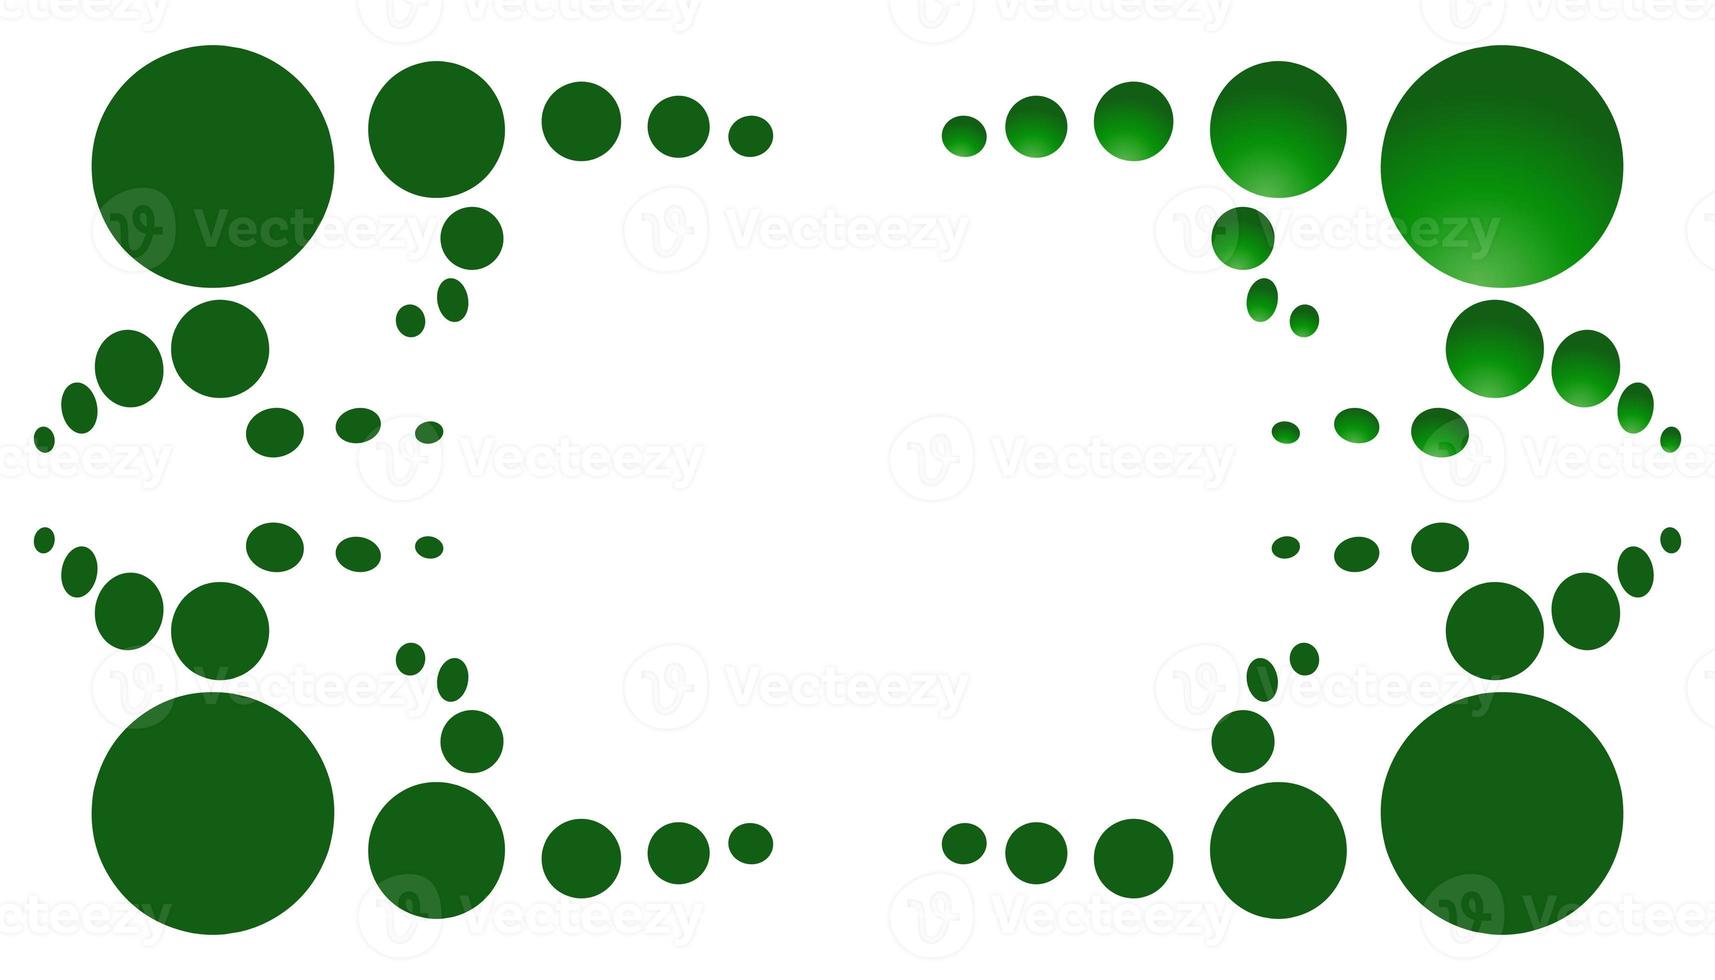 Abstract illustration background with green balls frame photo